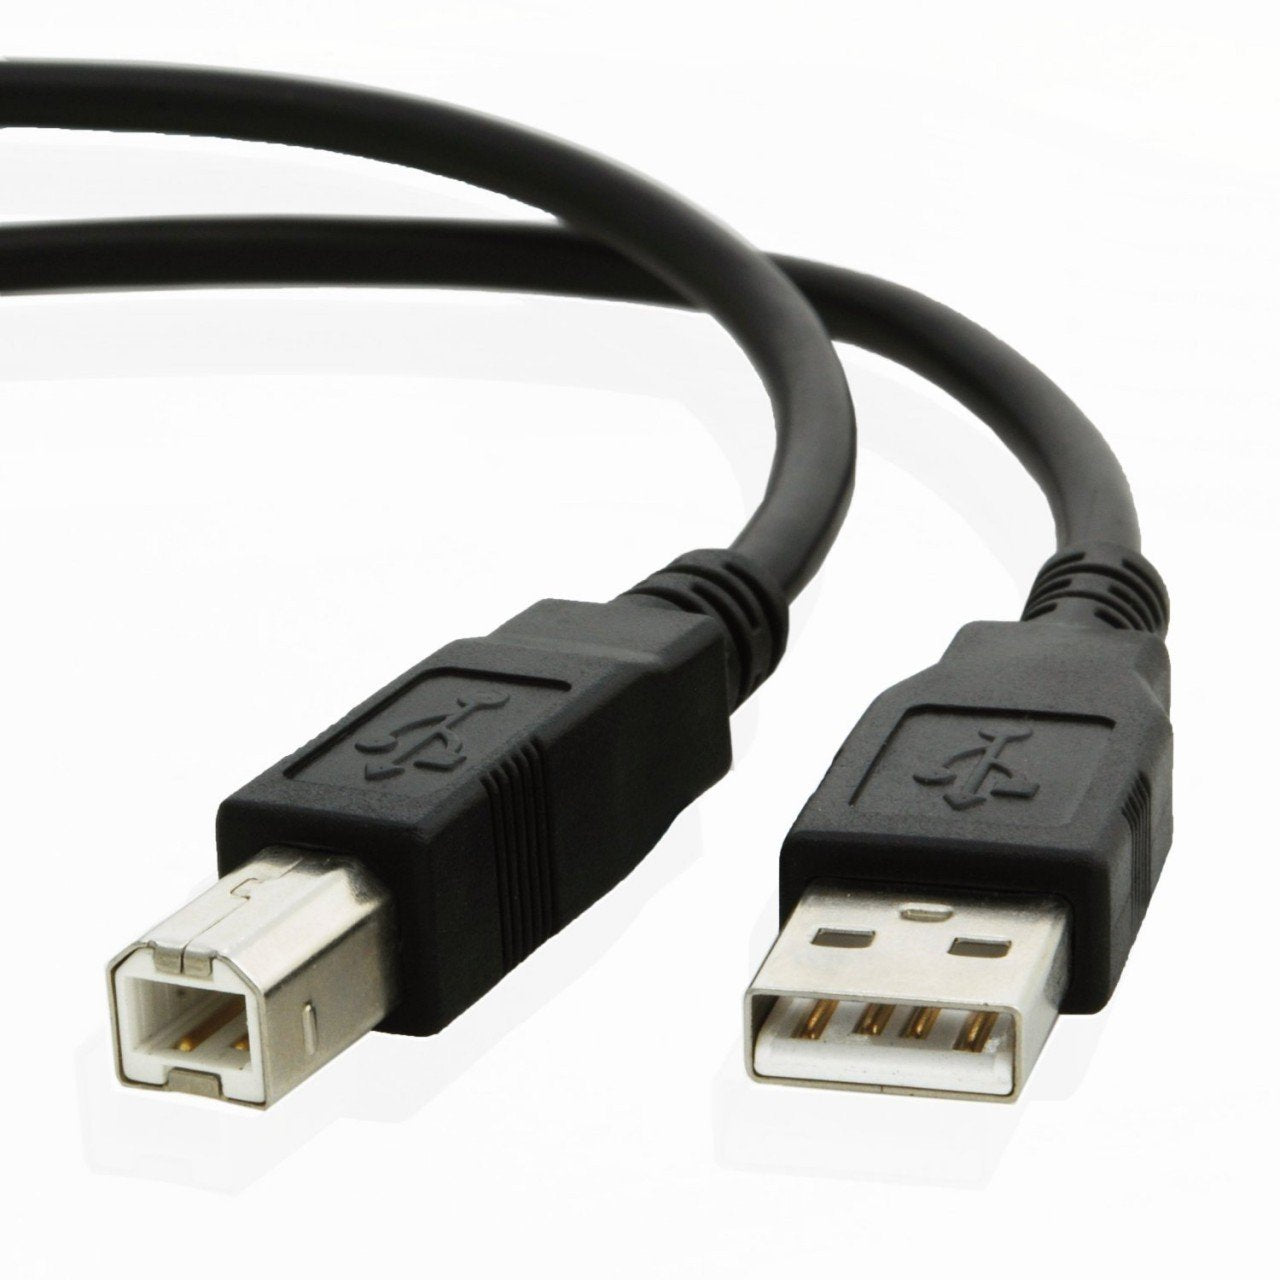 USB cable for Canon PIXMA MG6820